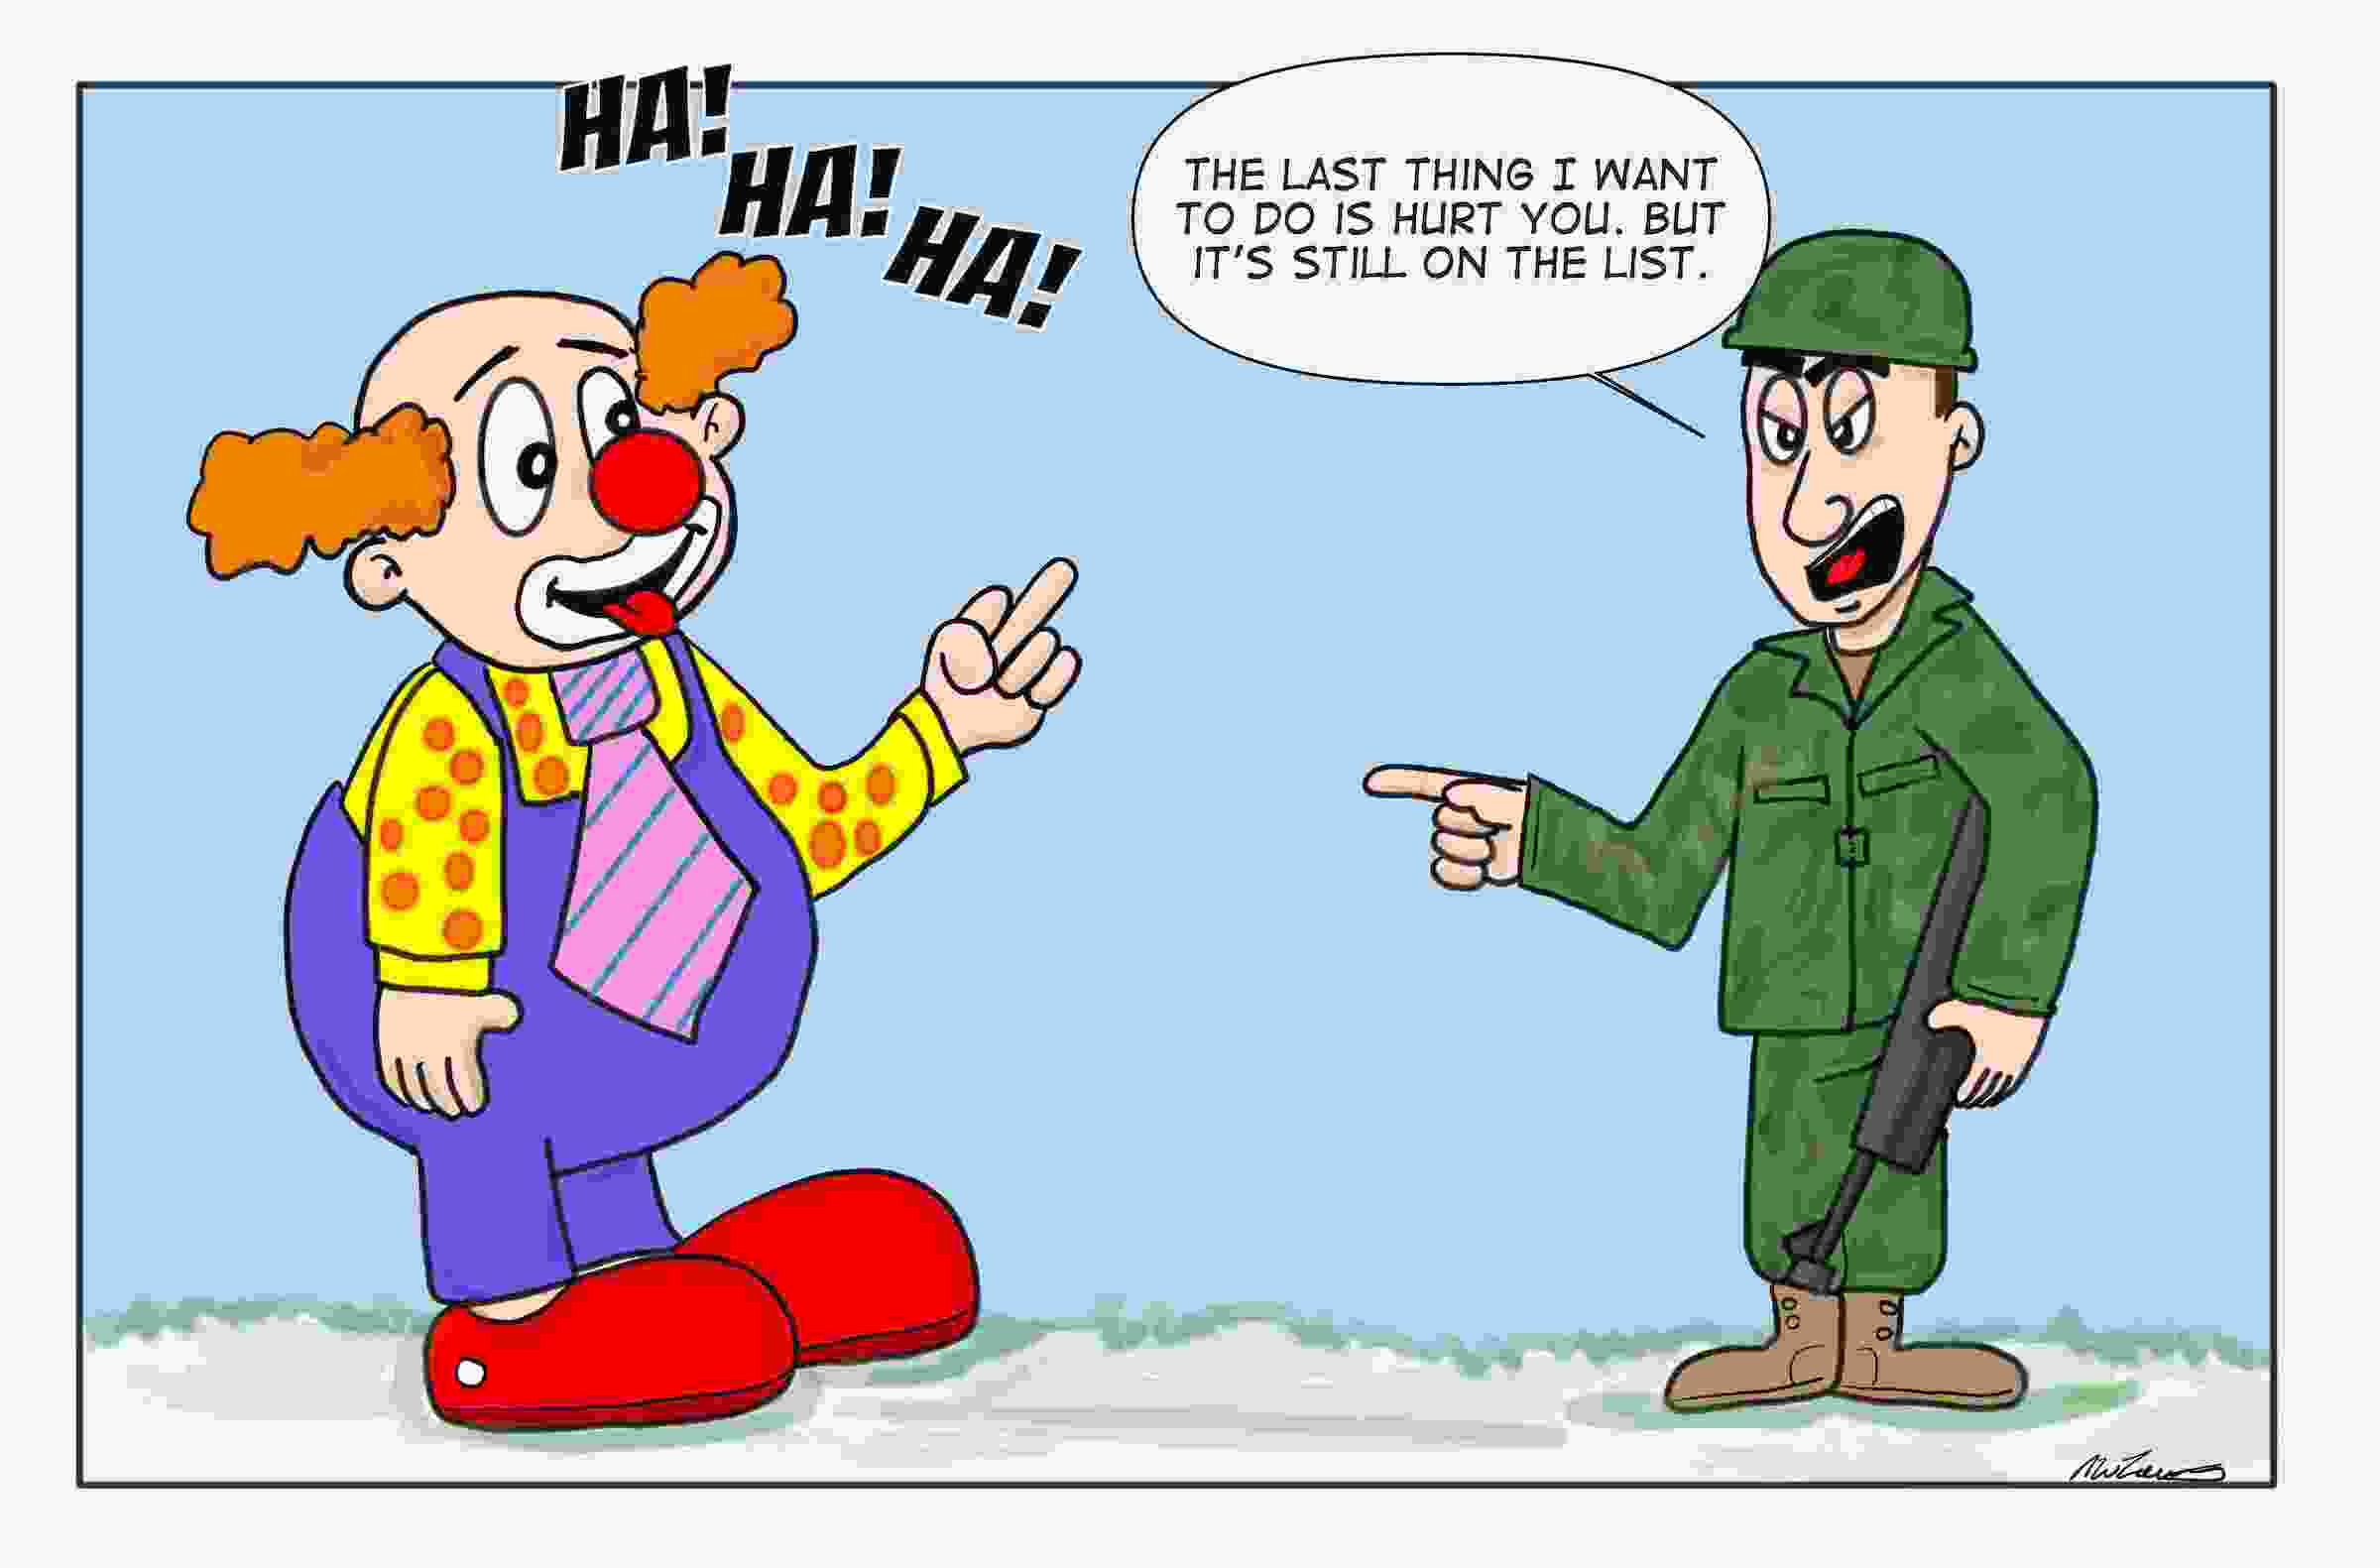 Army soldier vs. a clown, who would win?